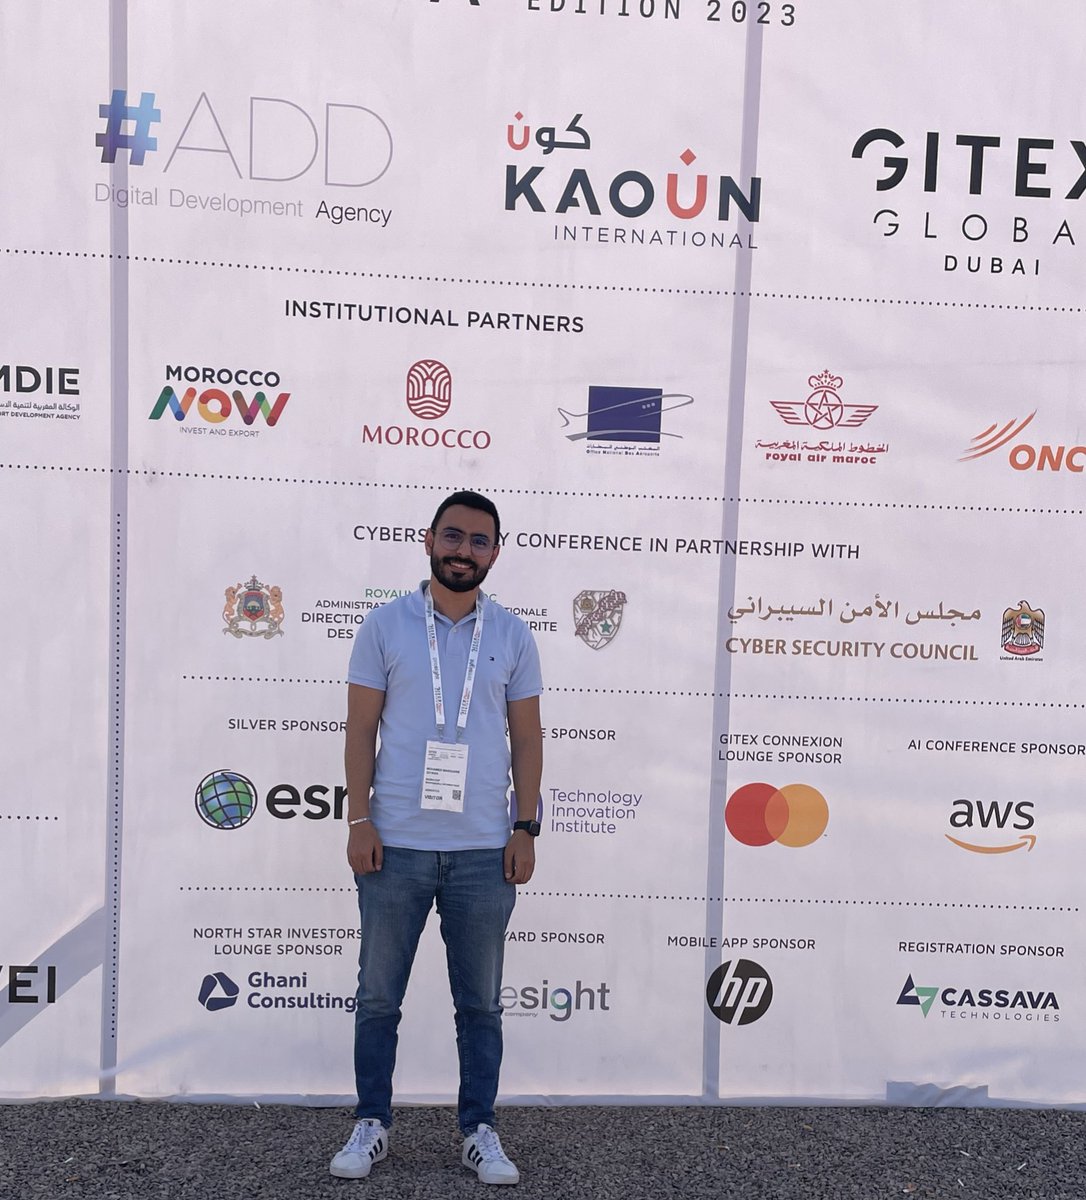 'Exciting experience at #GITEXAfrica! 🌍🚀 Got a chance to explore the latest tech innovations and connect with industry leaders. From AI to blockchain, the future looks bright! 🌟 Thanks to everyone at @GITEXEvents for organizing this incredible event. #TechConference